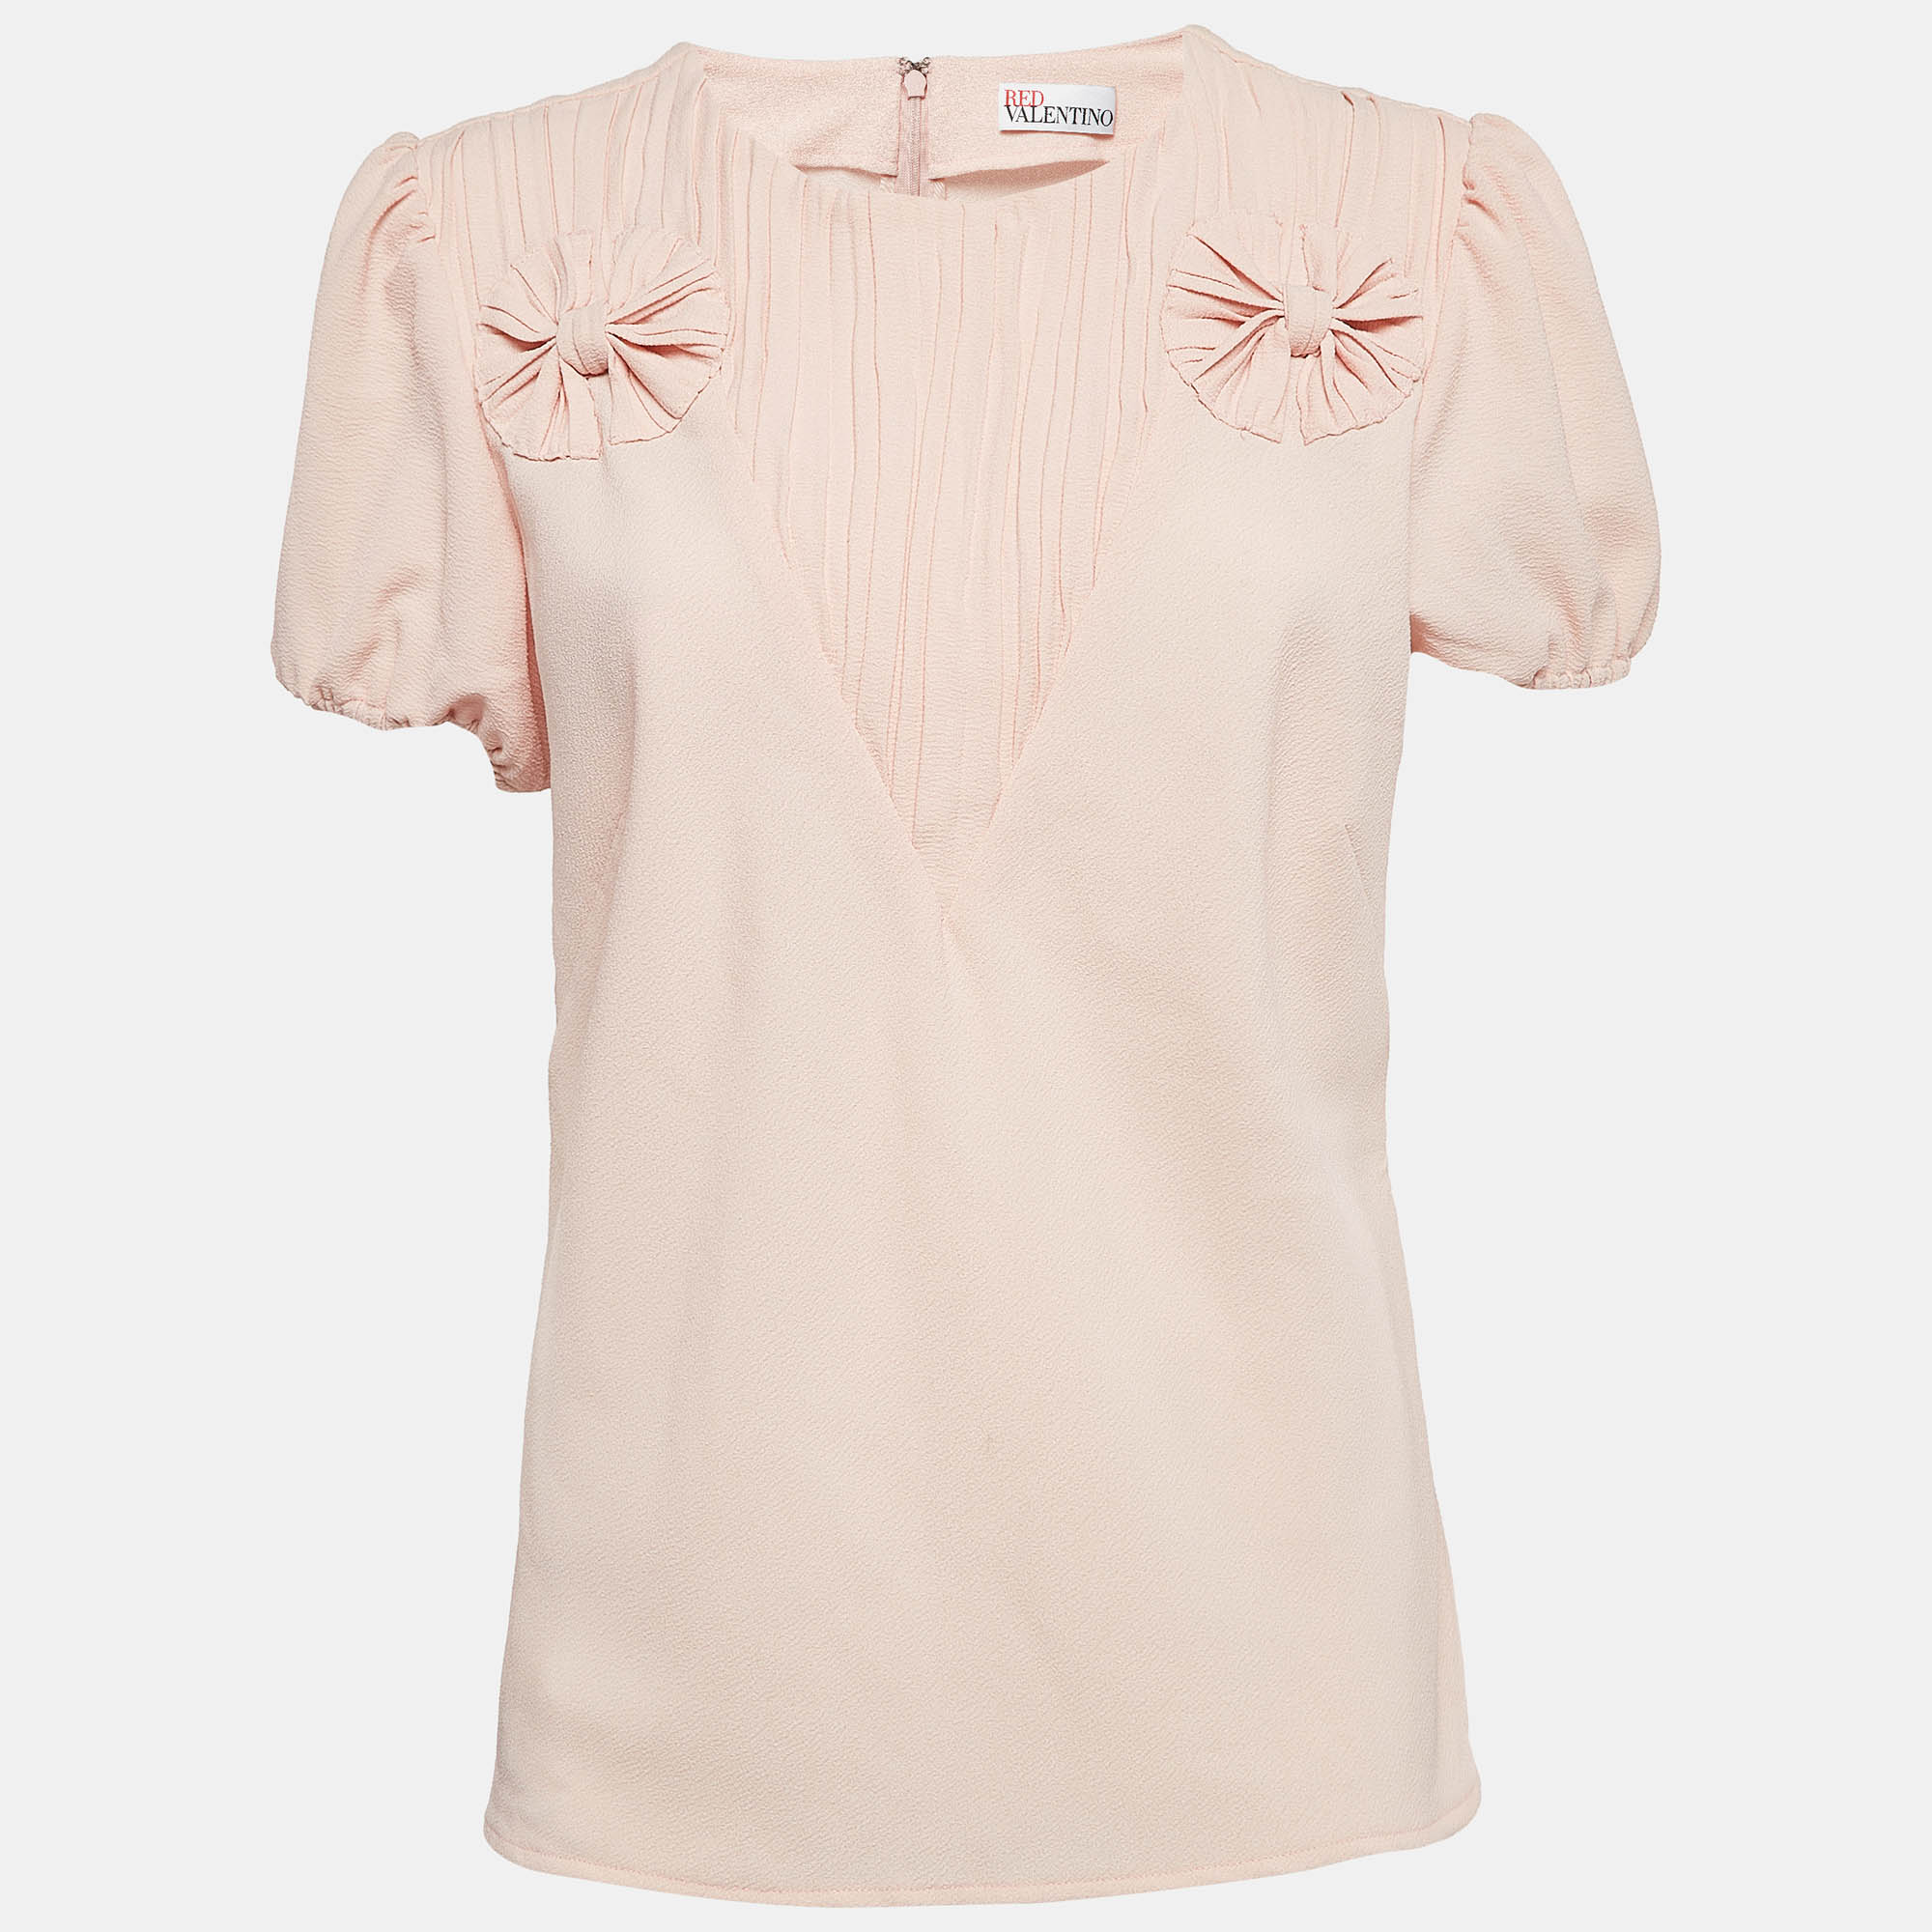 Red valentino pink crepe pintucked blouse l